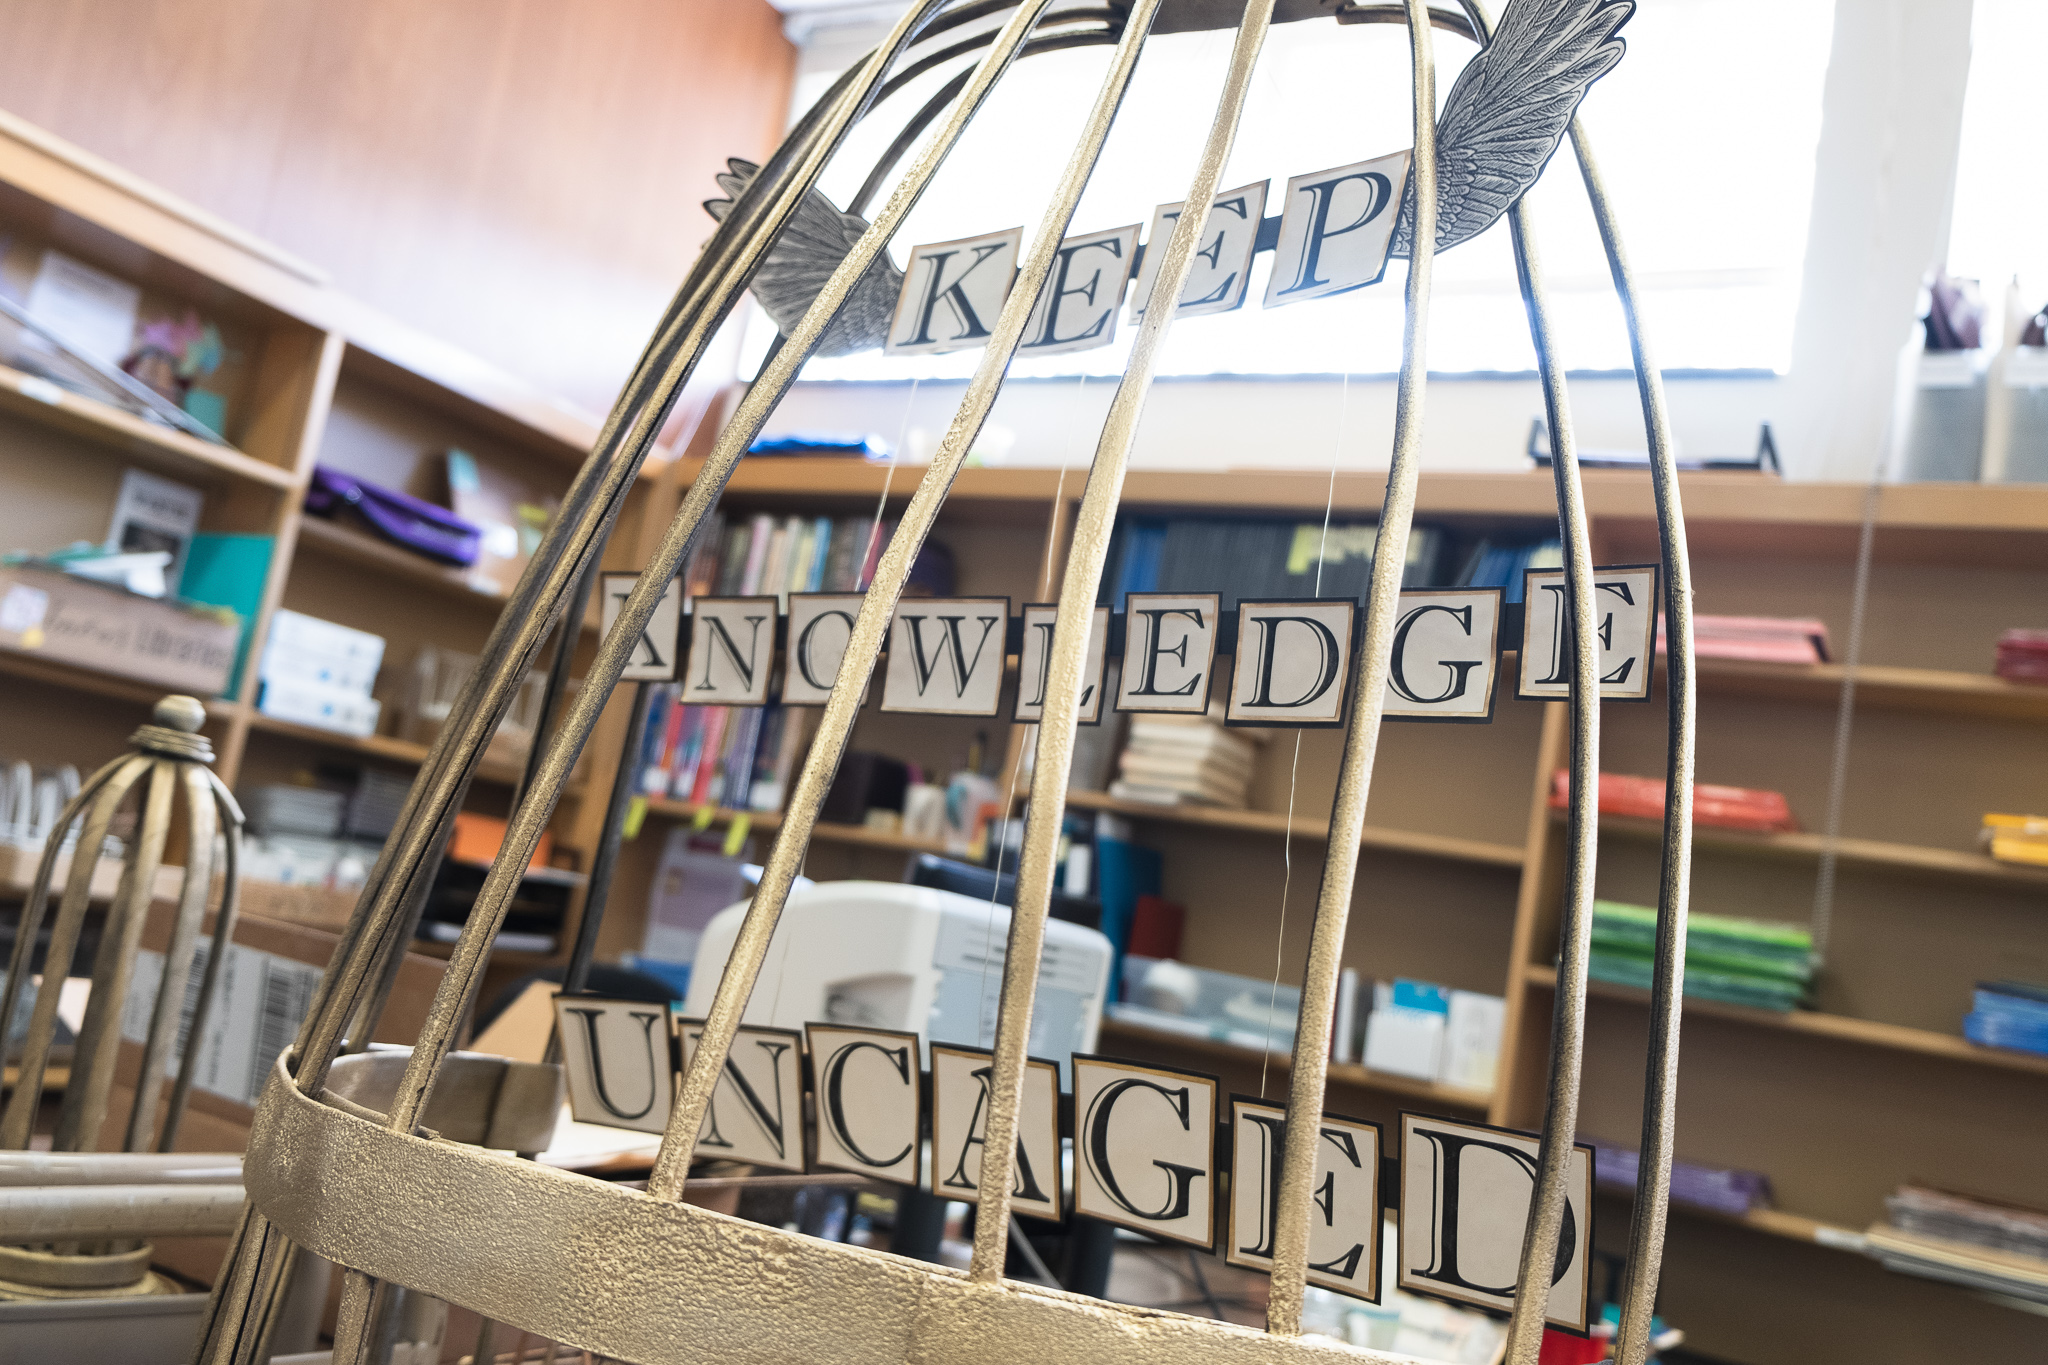 "Keep Knowledge Uncaged" is displayed at Soule Library to raise awareness of banned books.